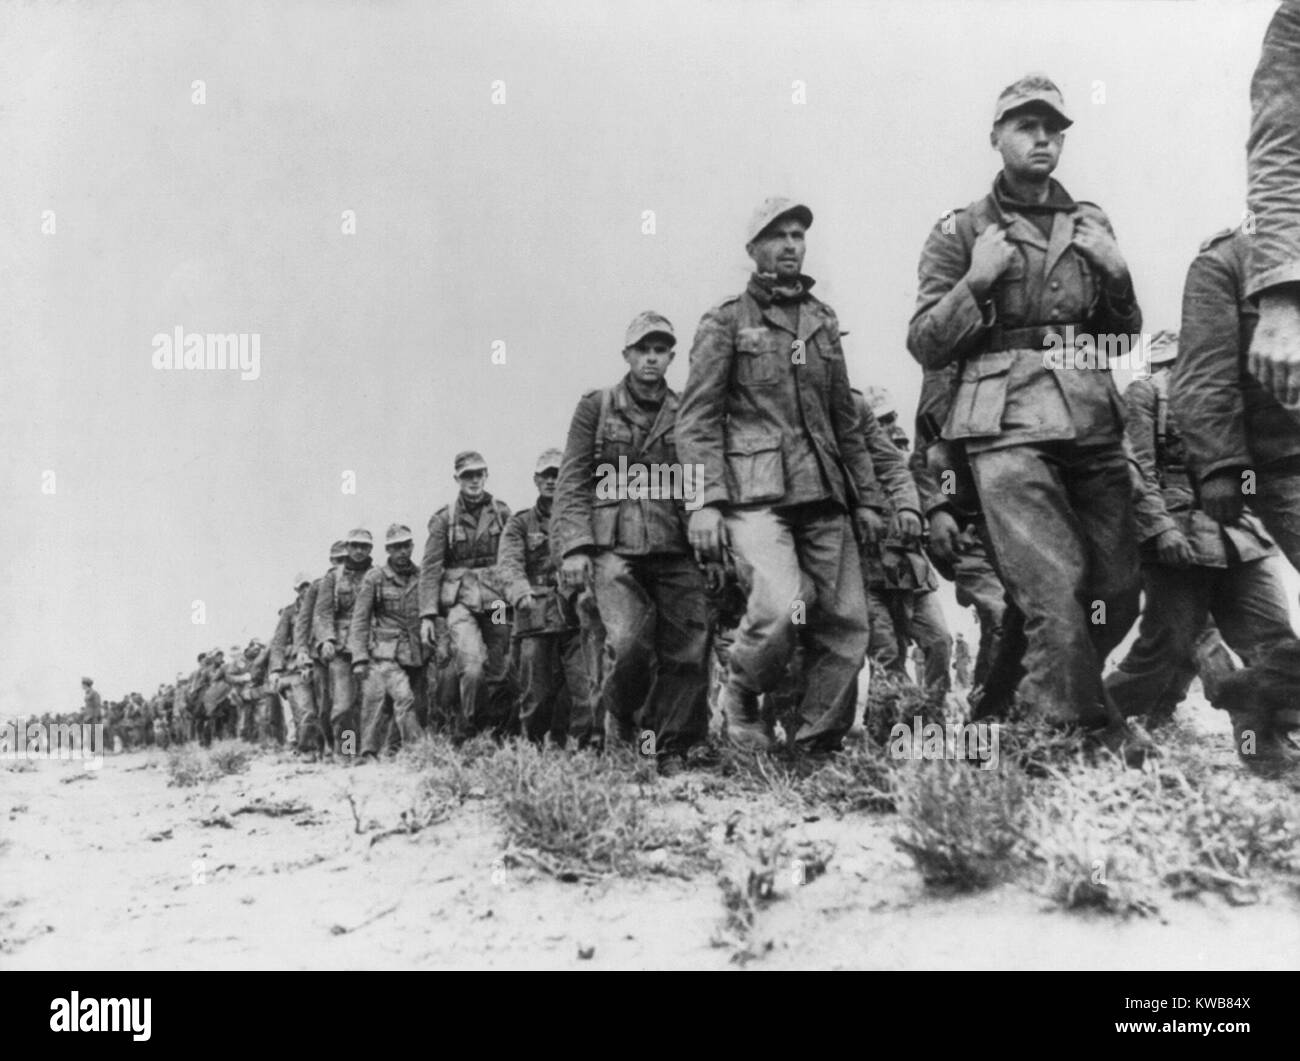 German Panzer prisoners captured during the Battle of Libya. Taken in the early phase of the battle, they are marching from the battle front to a prisoners-of-war camp near Tobruk. Ca. 1942 during World War 2. (BSLOC 2014 10 6) Stock Photo